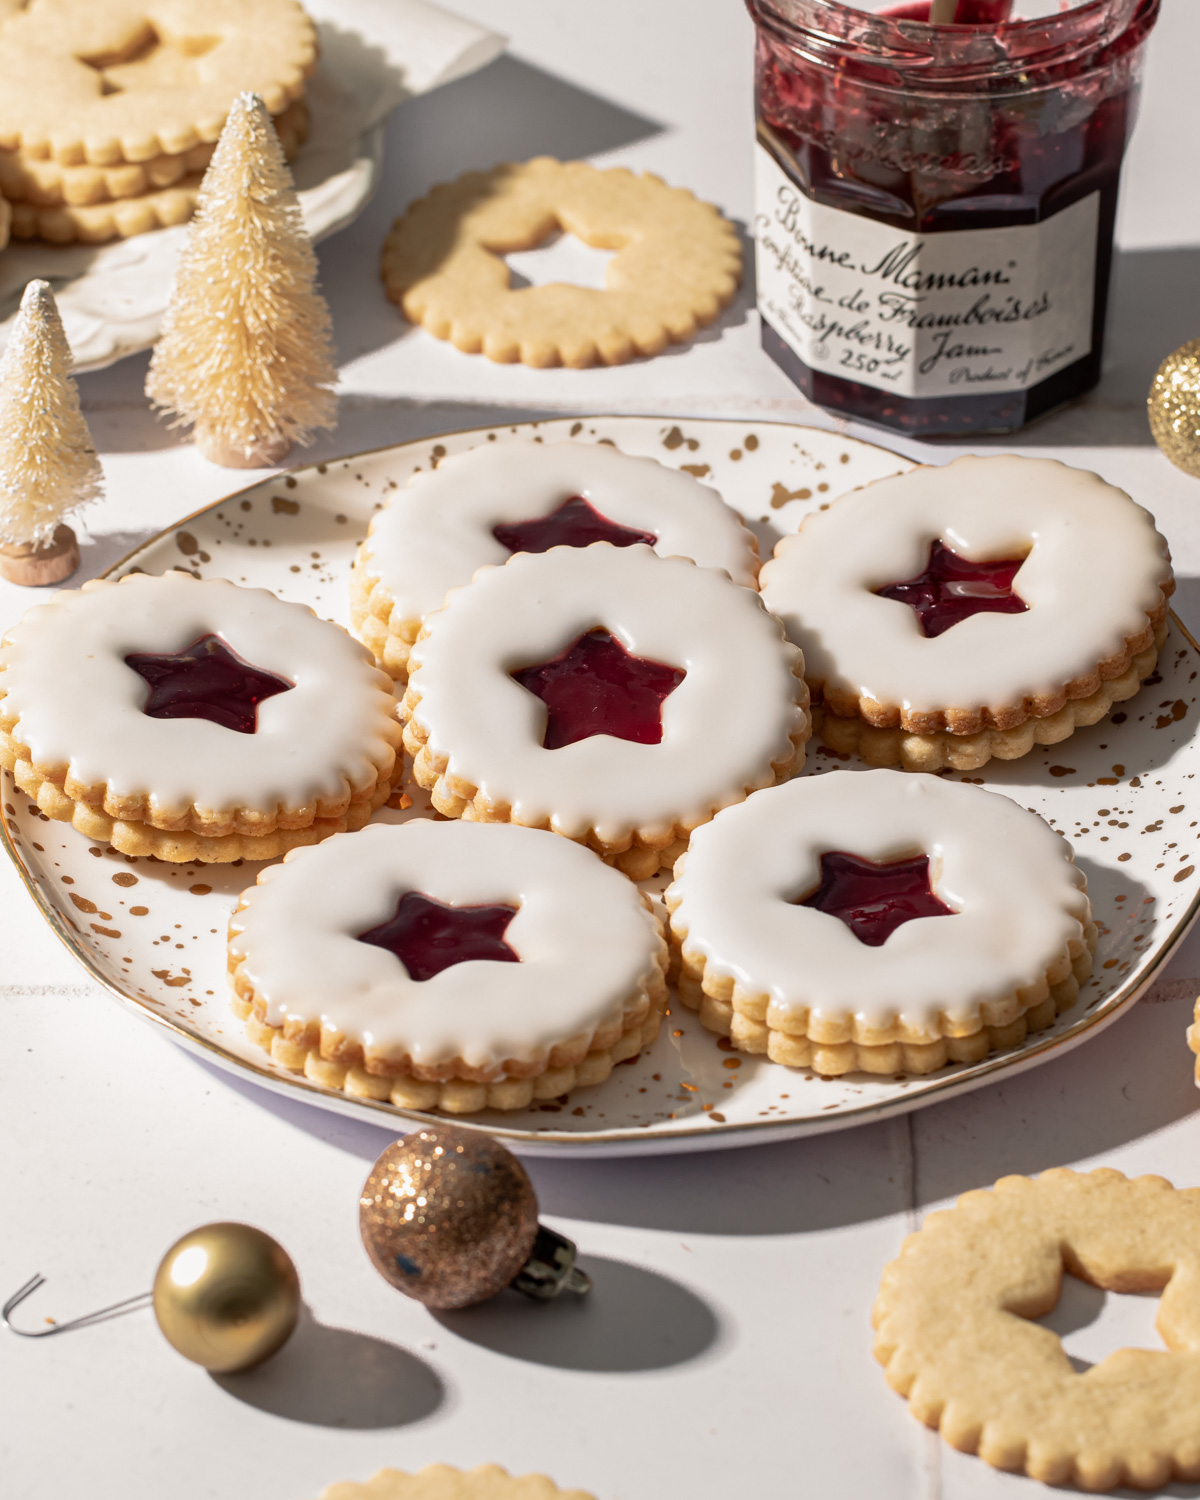 Raspberry linzer cookies made with Bonne Maman jam